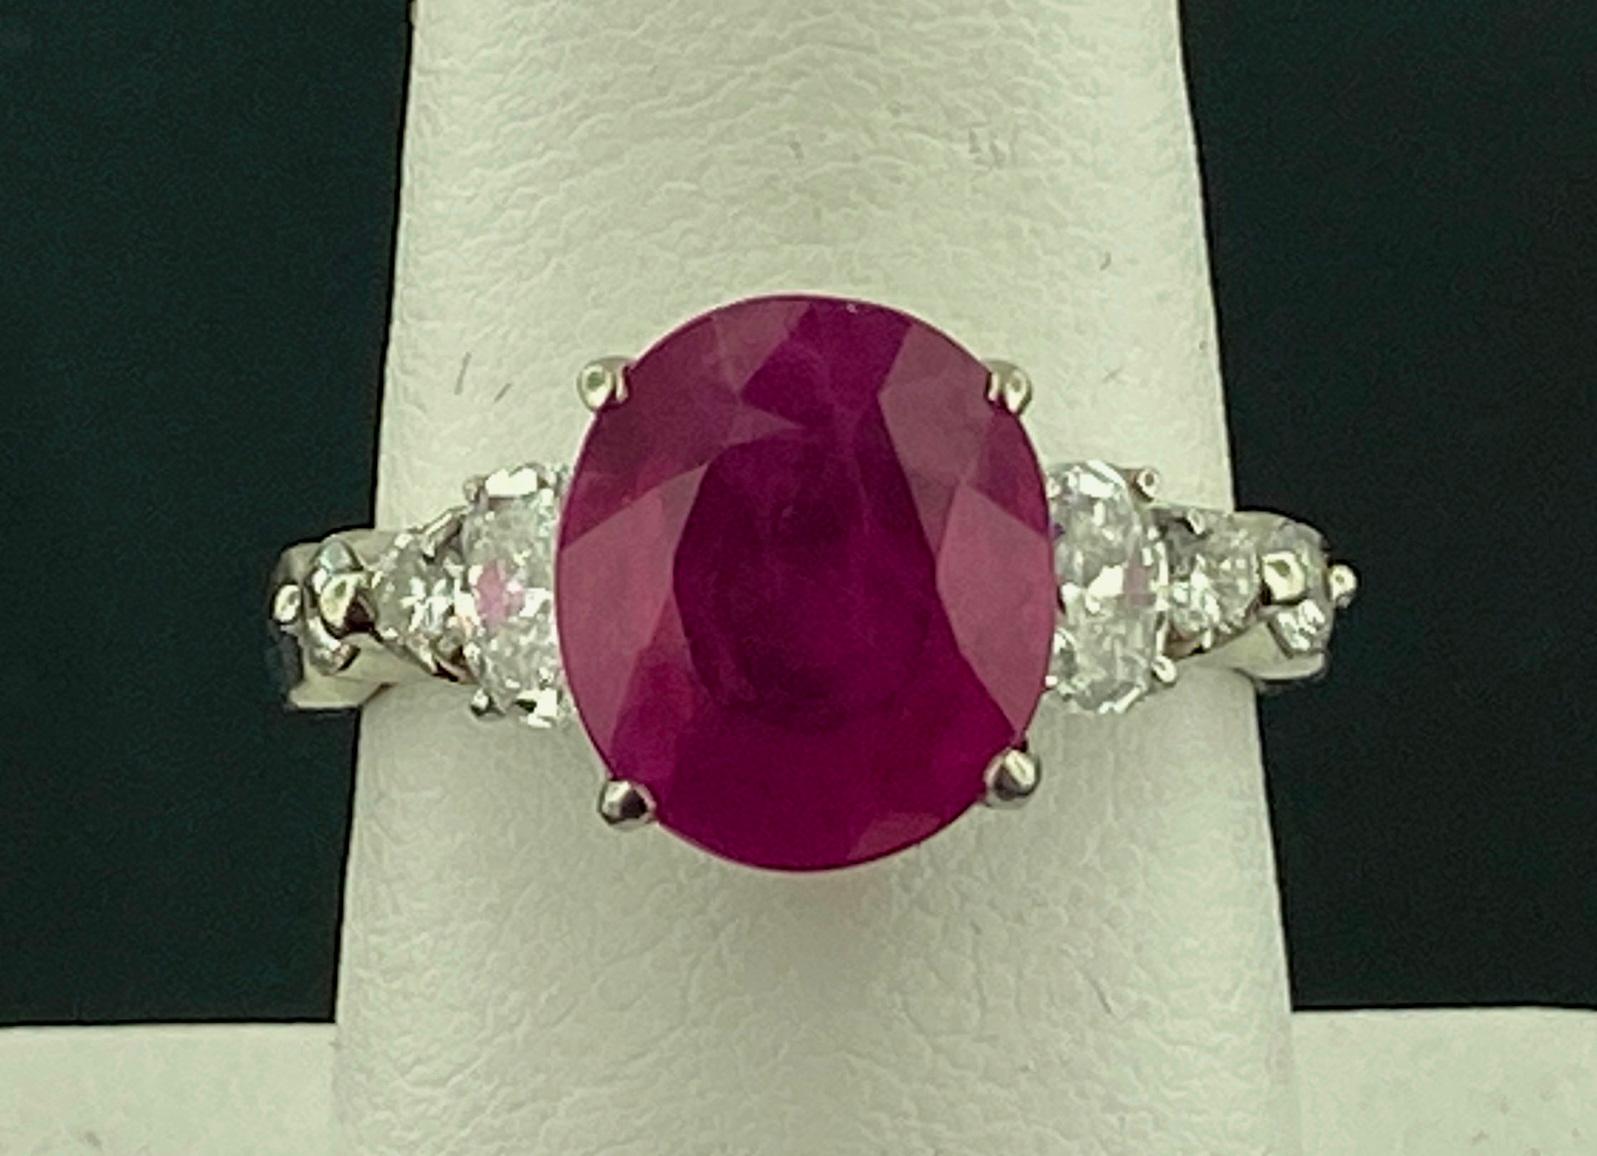 Set in Platinum, weighing 10.21 grams, is one 5.48 carat Oval Cut Ruby with 2 Oval Cut diamonds weighing 0.84 carats, Color Grade of: F-G, Clarity grade of: VS, plus 4 Round Brilliant Cut diamonds weighing 0.35 carats, Color Grade of: F-G, Clarity